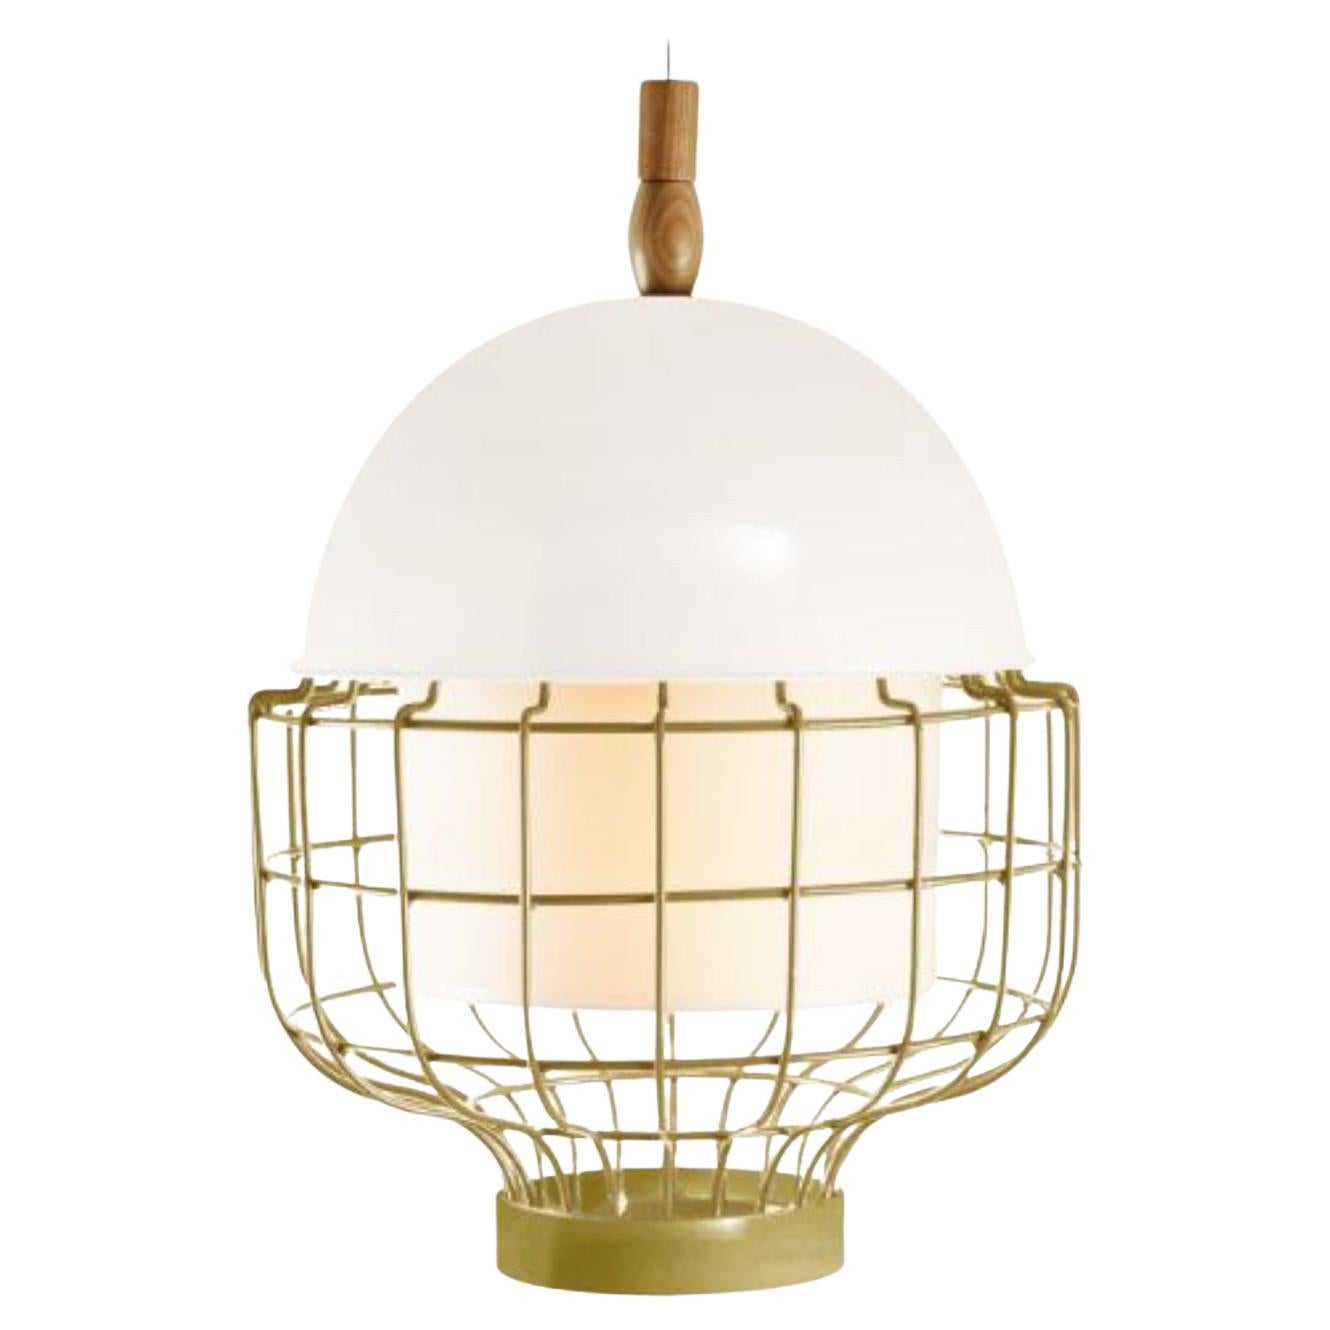 Ivory Magnolia III Suspension Lamp by Dooq For Sale